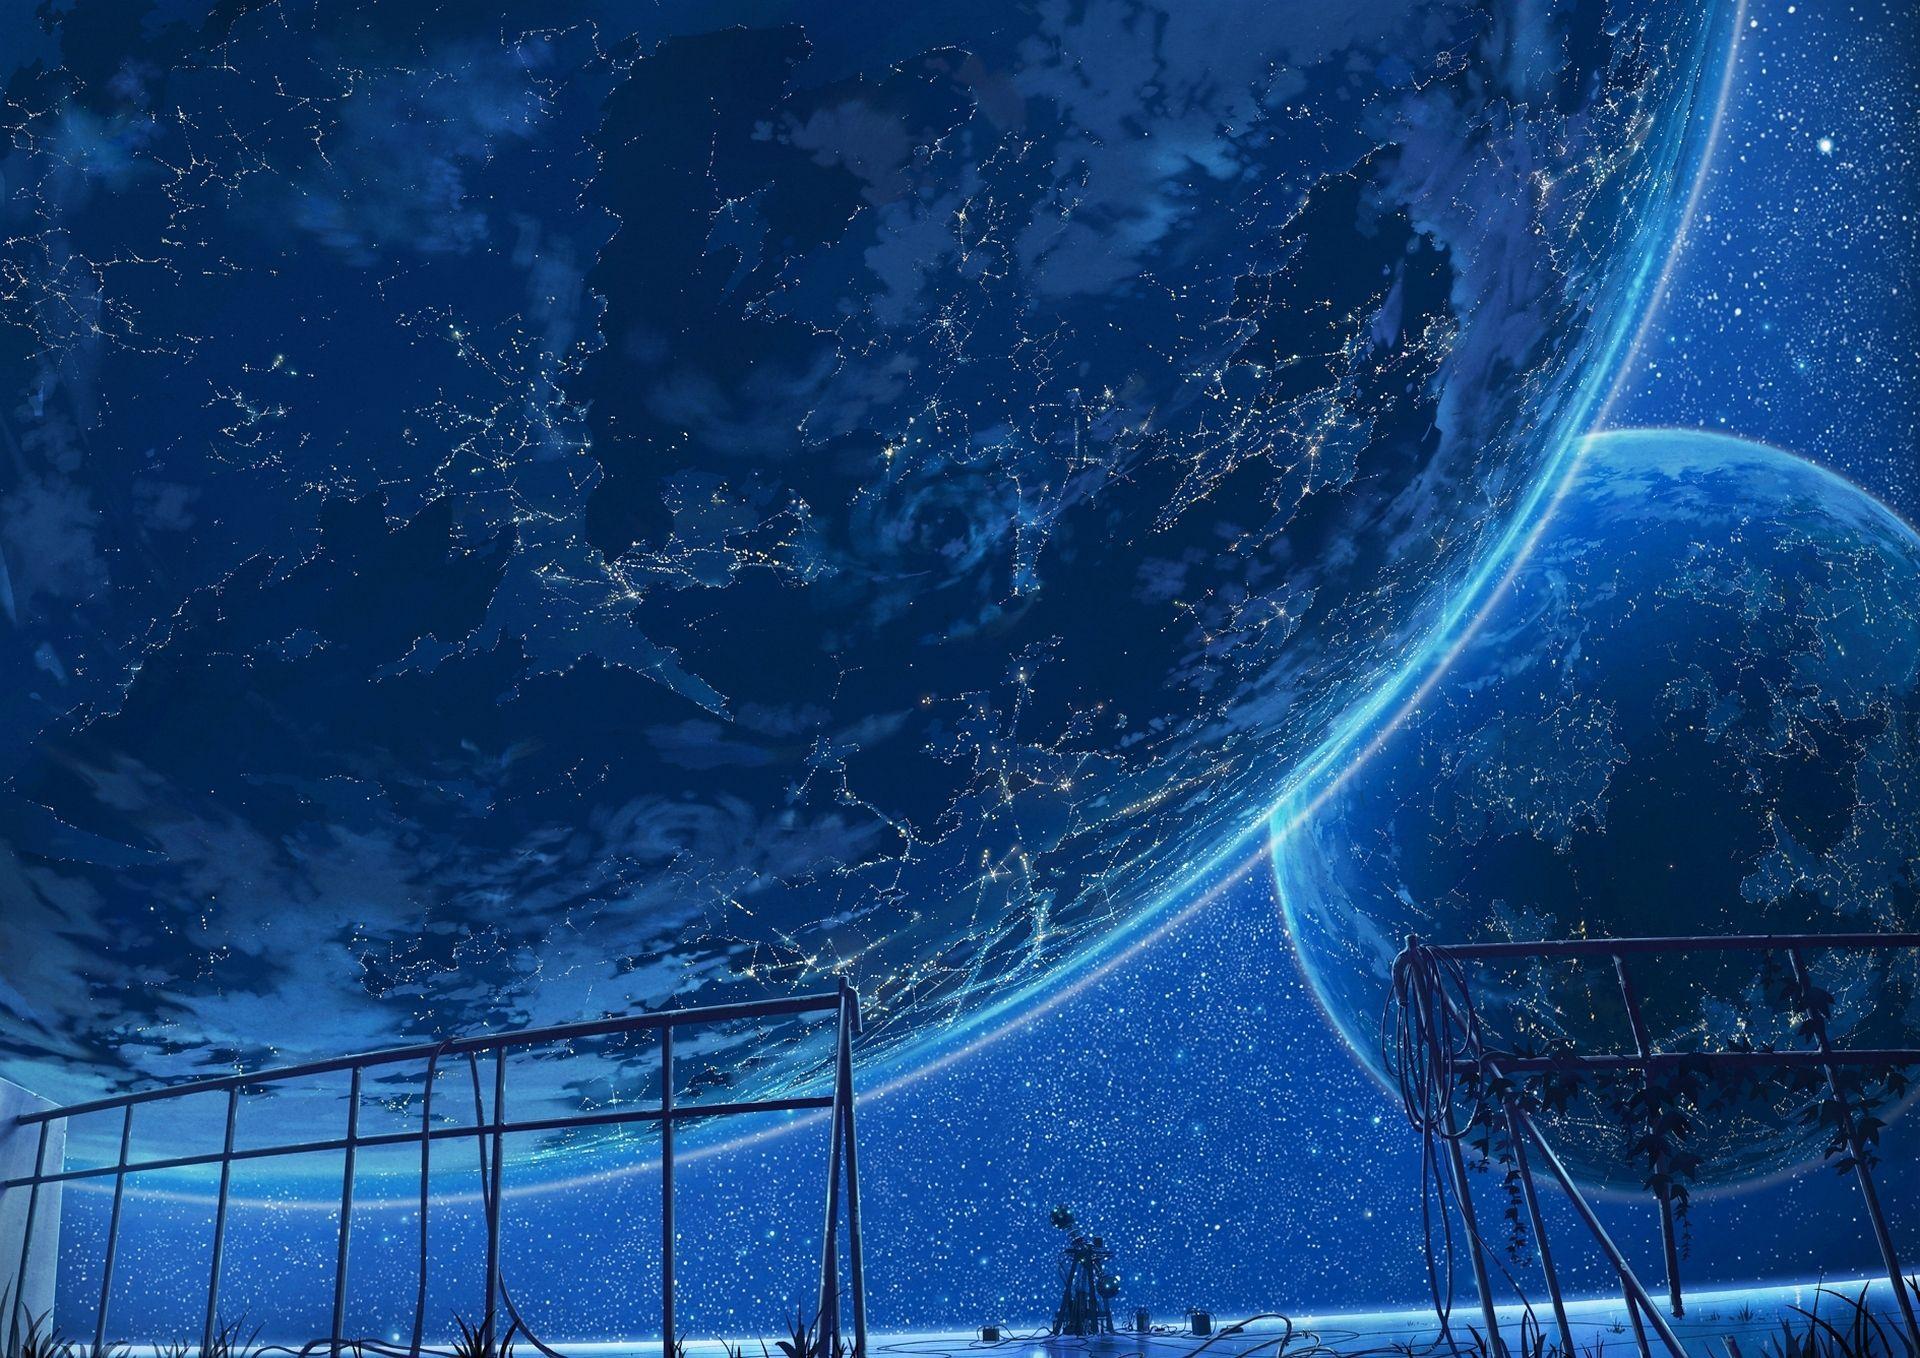 Wallpaper  illustration anime planet Earth universe screenshot  computer wallpaper atmosphere of earth outer space astronomical object  1300x1276  CrisEVA01  58466  HD Wallpapers  WallHere